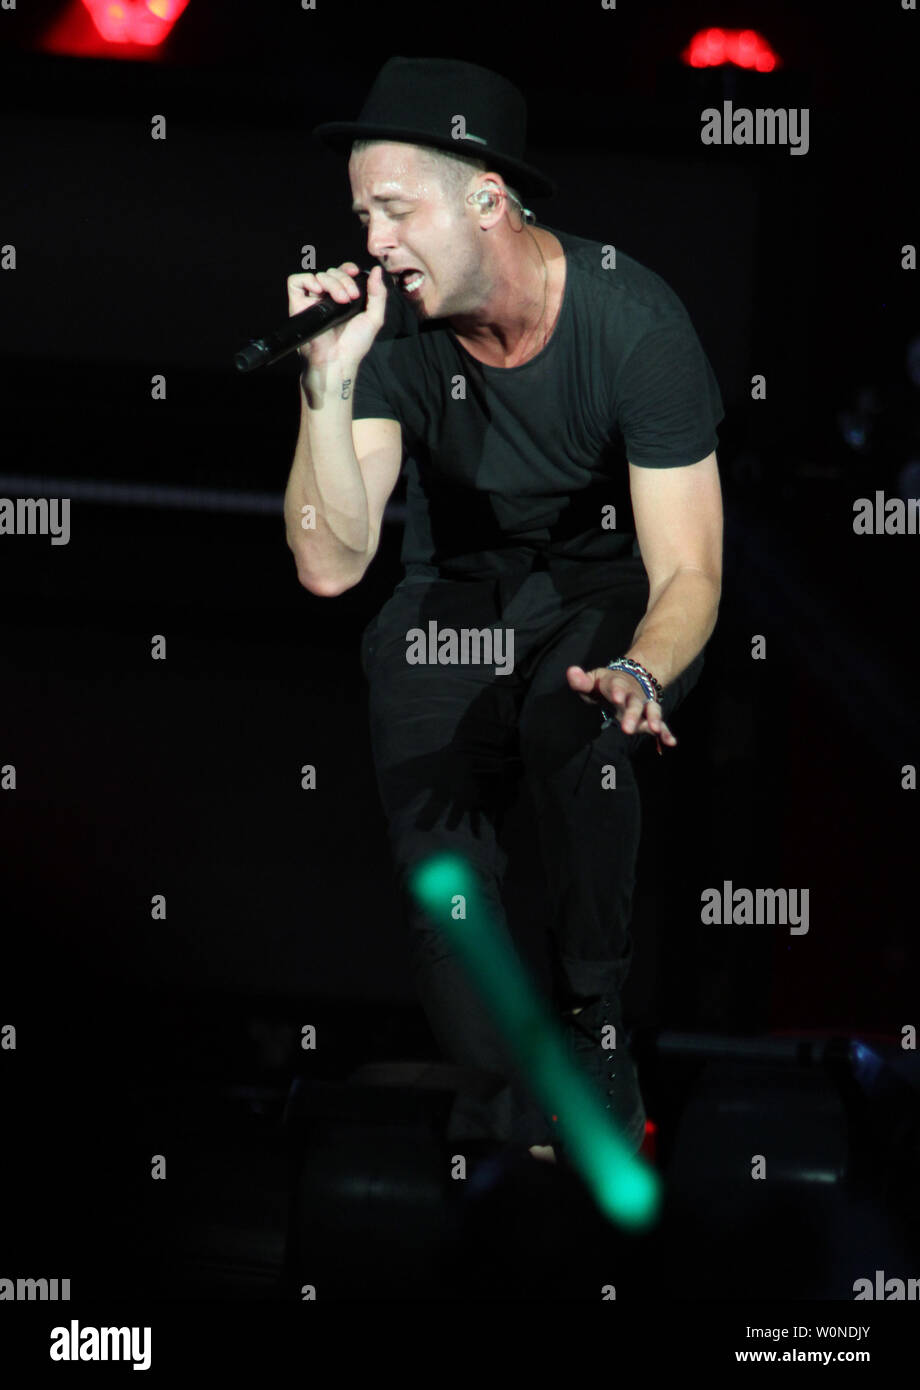 Ryan Tedder with OneRepublic performs in concert at the Cruzan Amphitheatre in West Palm Beach, Florida on August 17, 2014. UPI/Michael Bush Stock Photo